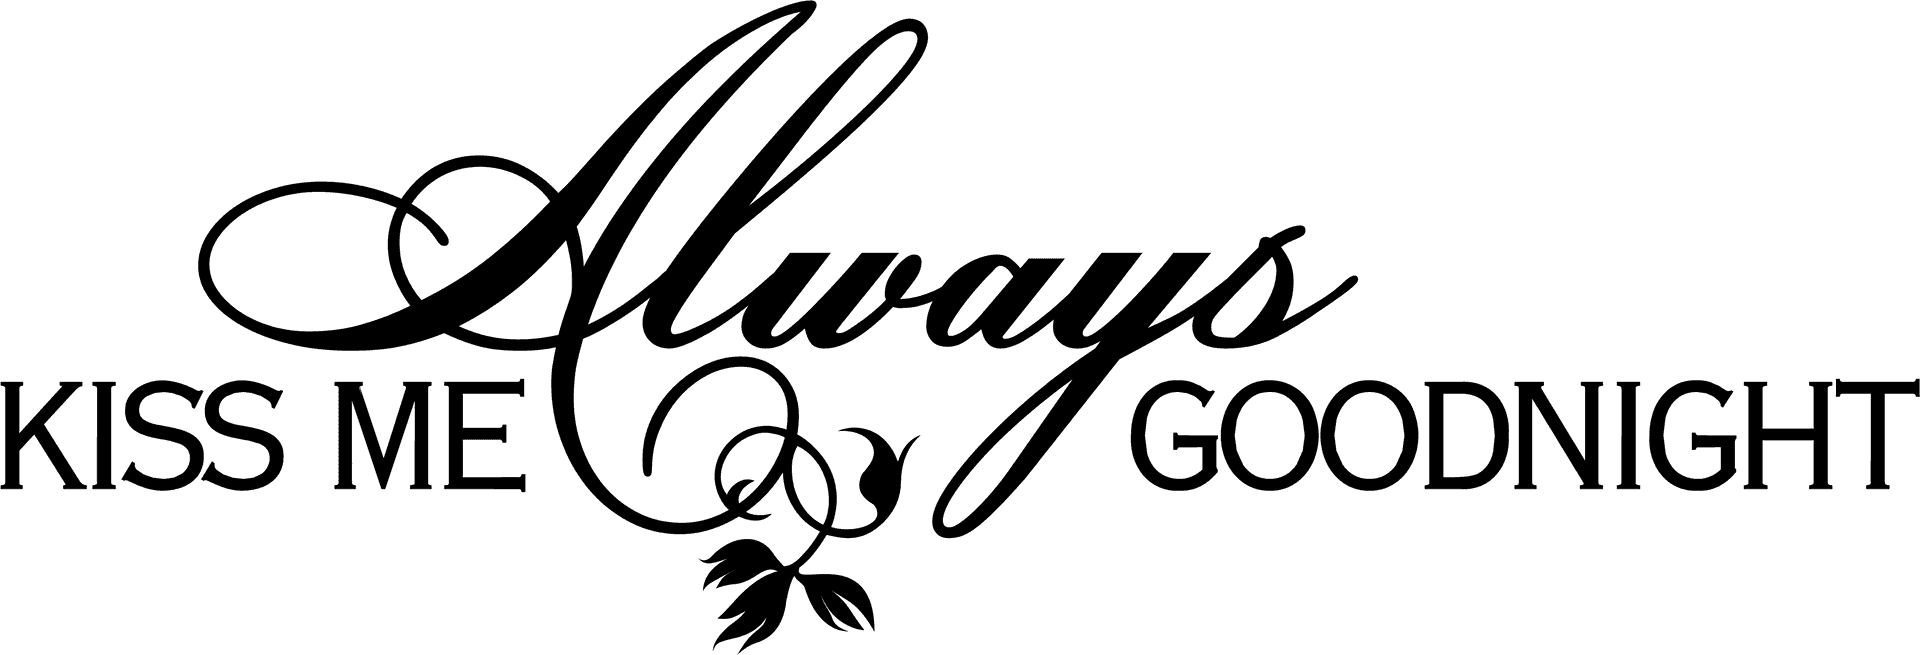 Always Kiss Me Goodnight Calligraphy PNG image